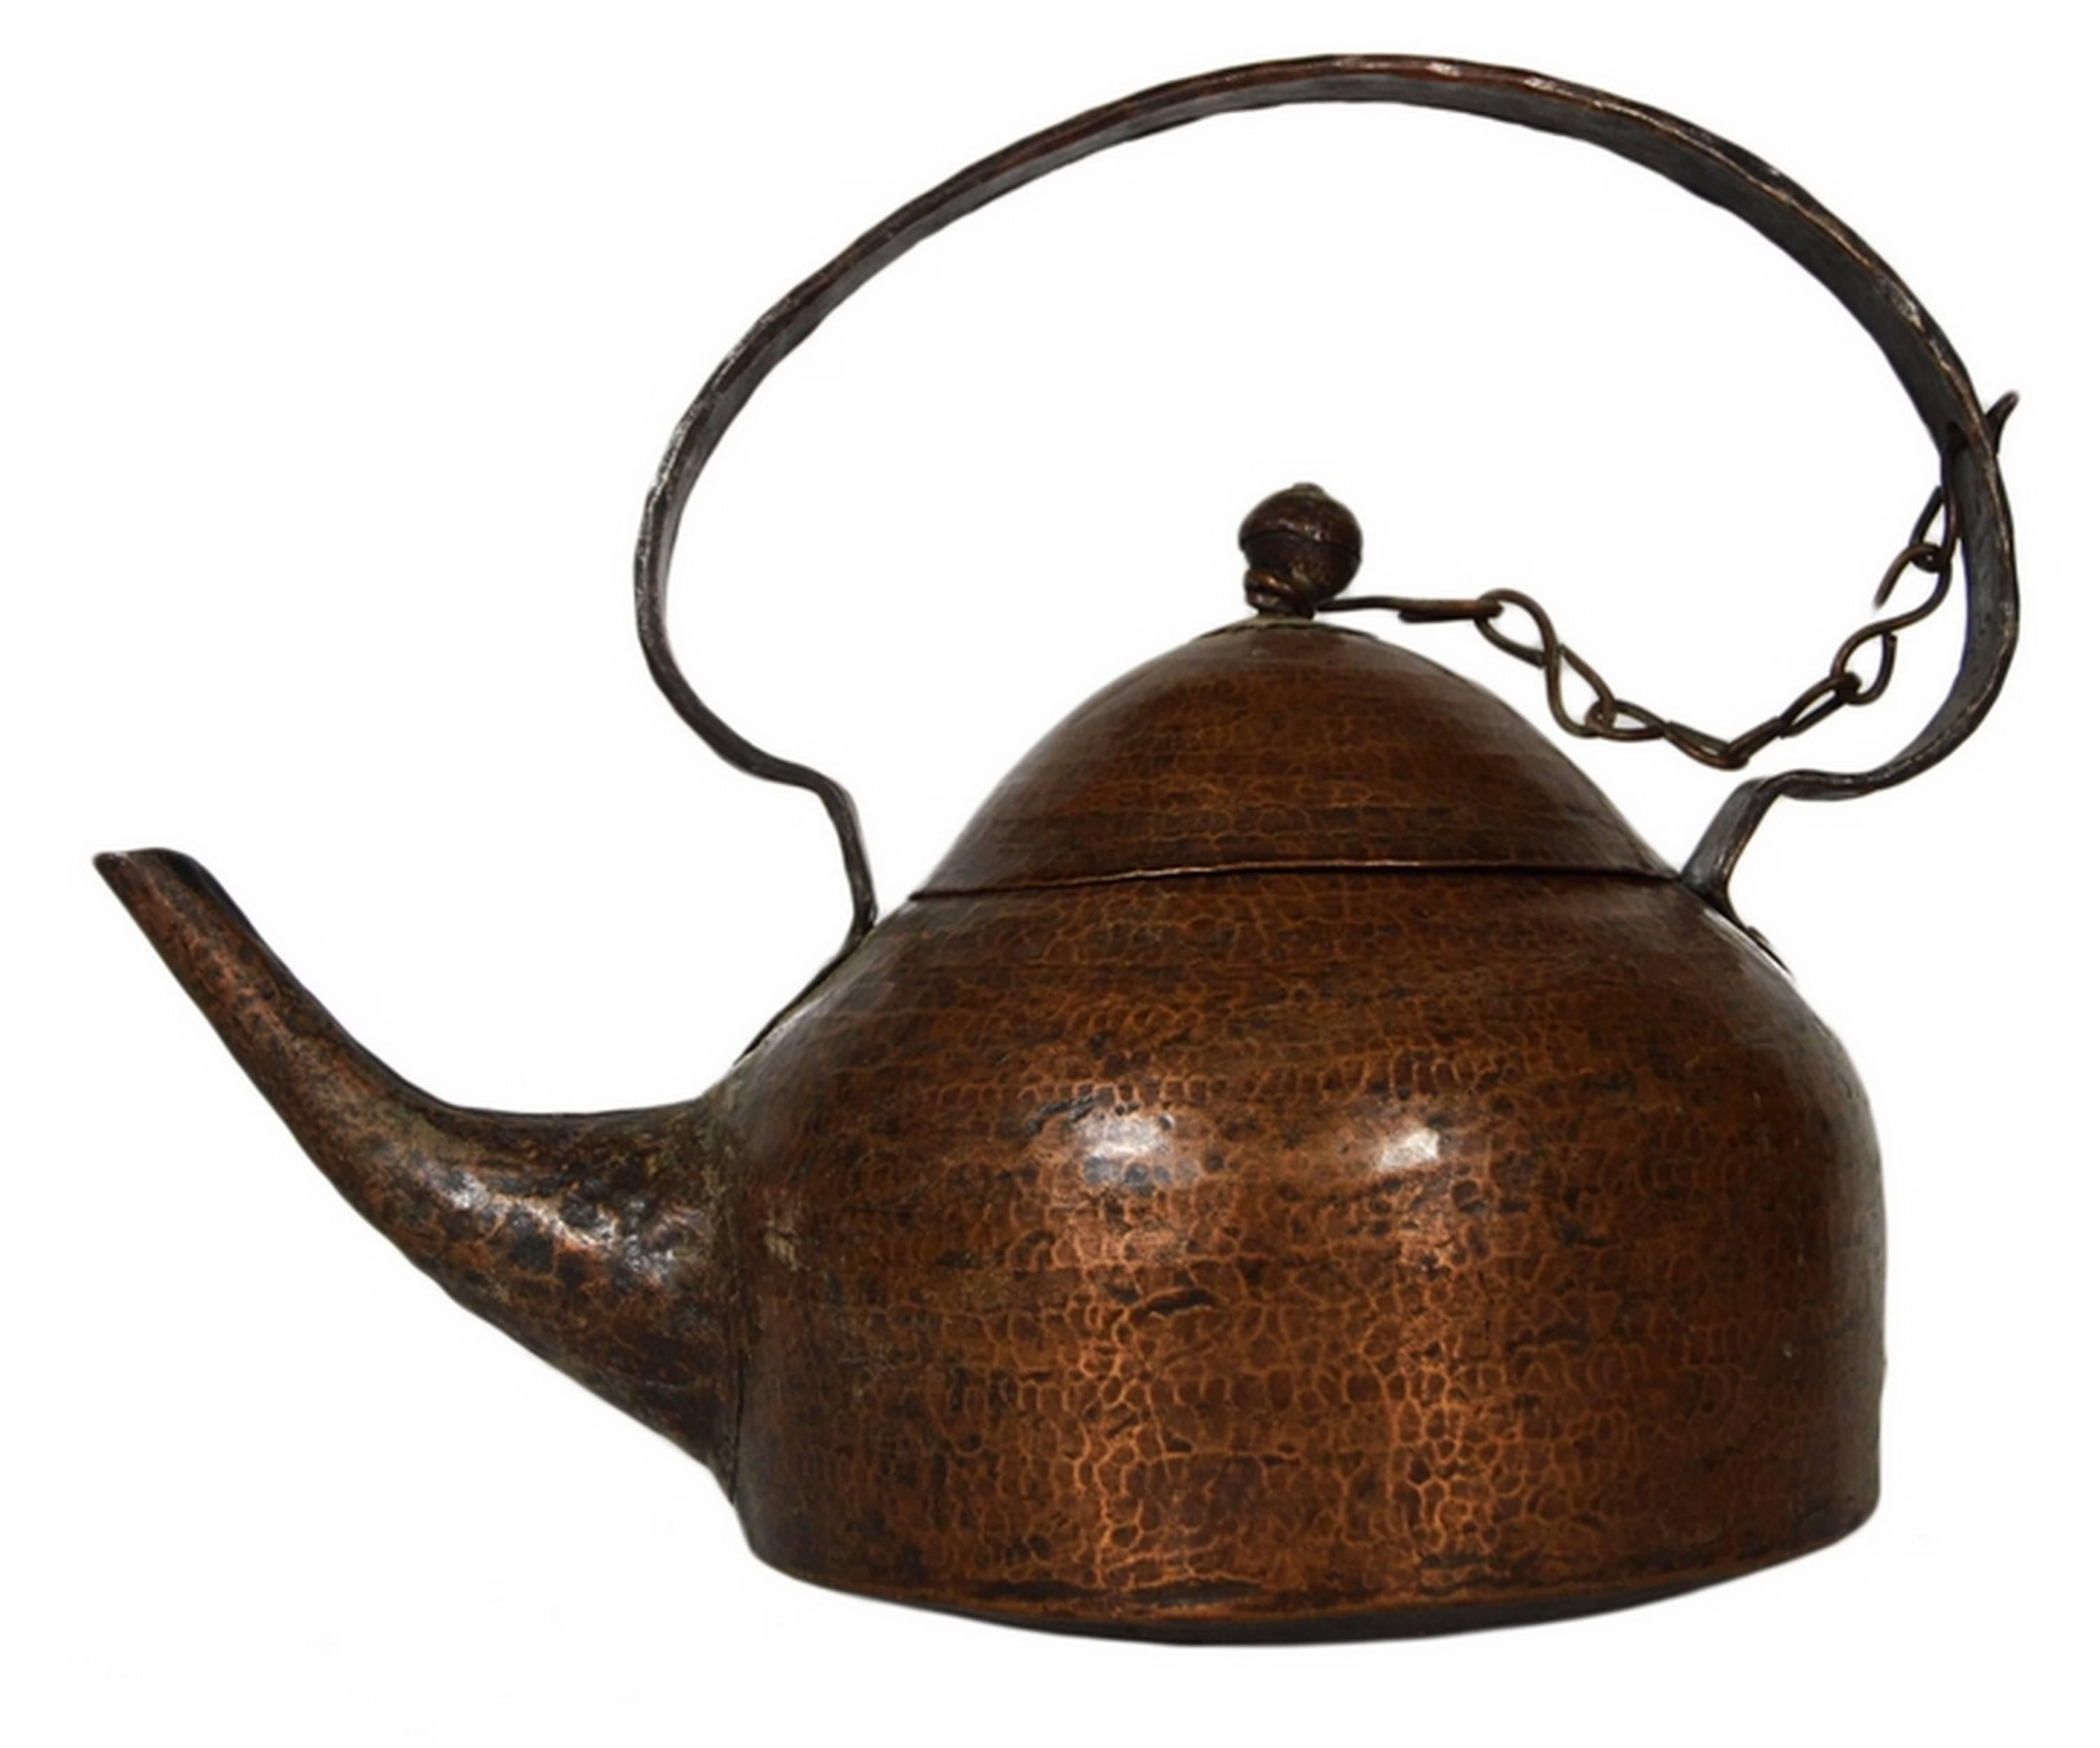 Indian Vintage Hand-Hammered Copper Teapot with Patina from 20th Century, India For Sale